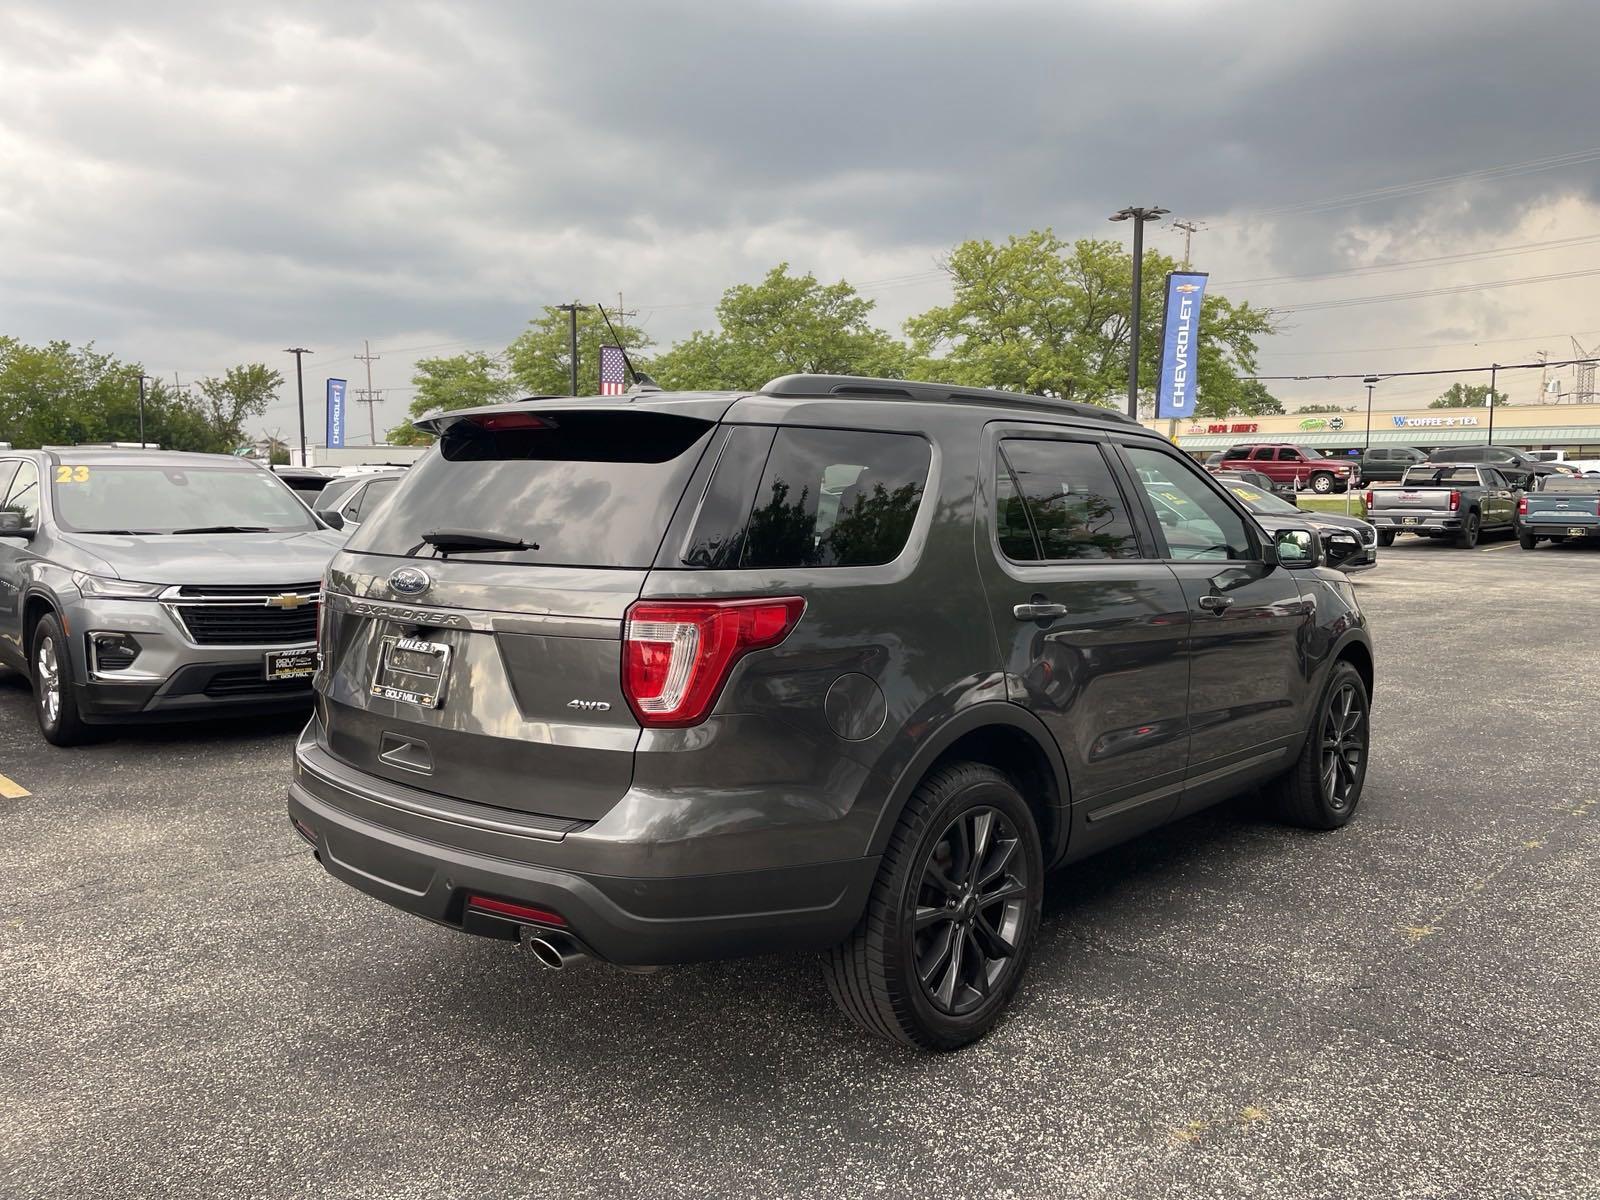 2019 Ford Explorer Vehicle Photo in Saint Charles, IL 60174